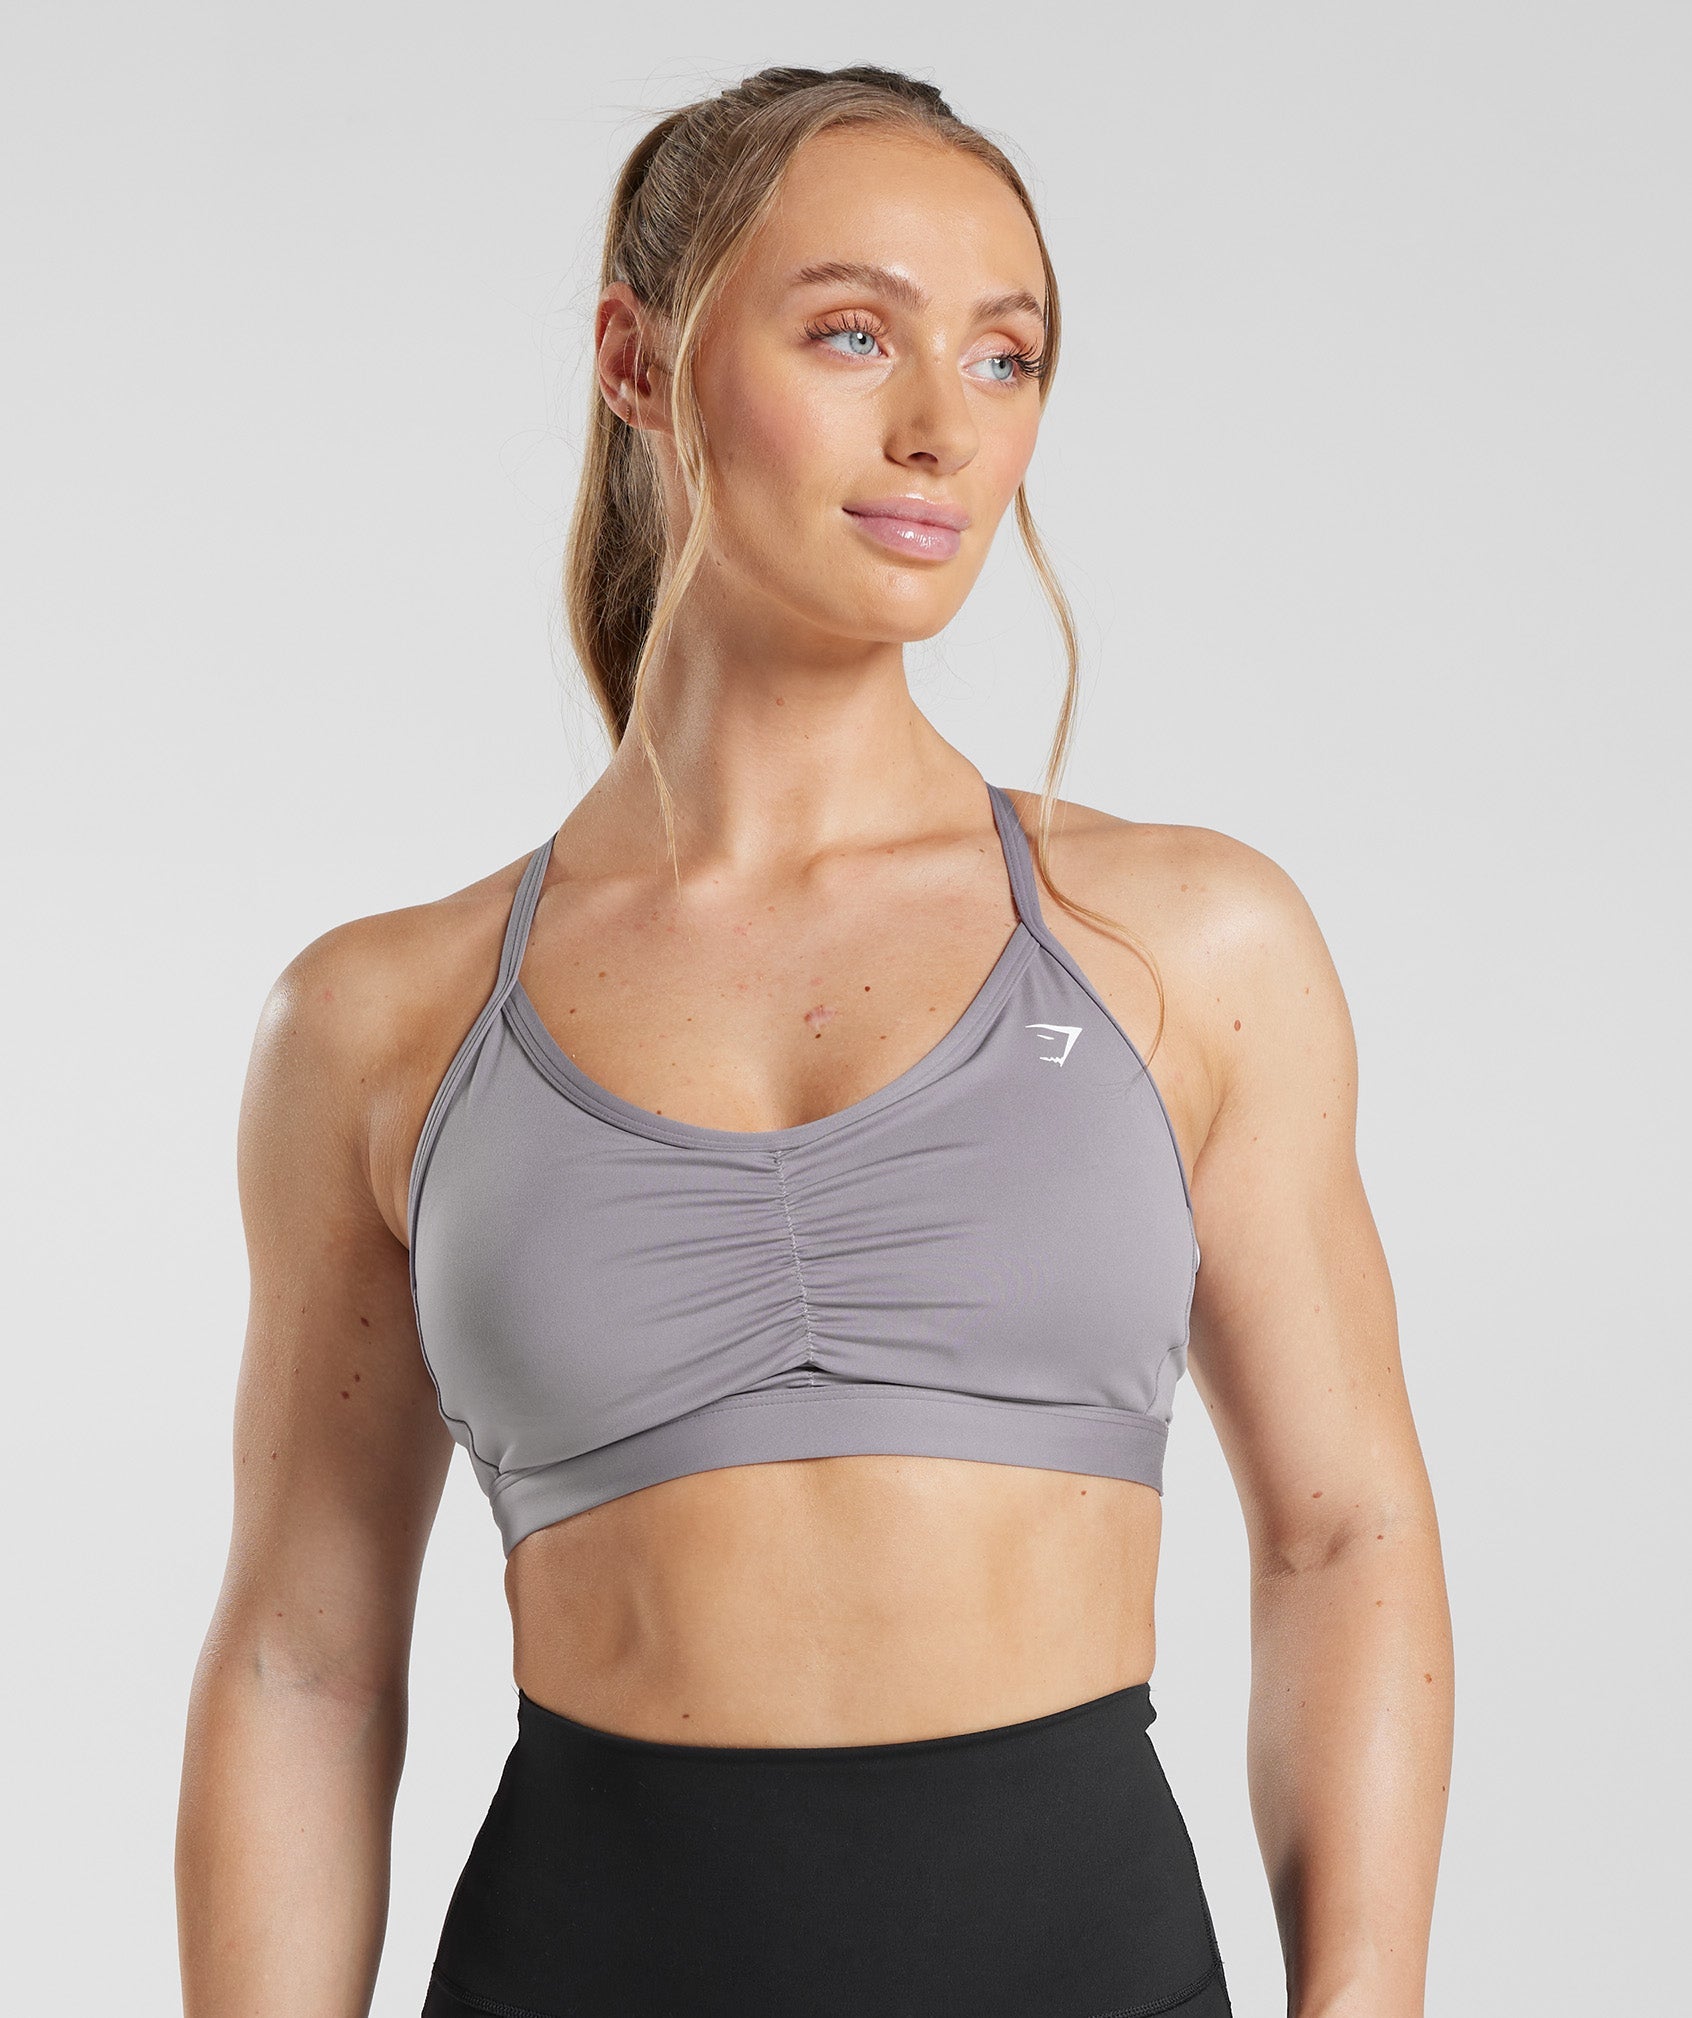 Gymshark Ruched Training Sports Bra - Grey Size L - $20 (33% Off Retail) -  From Claire